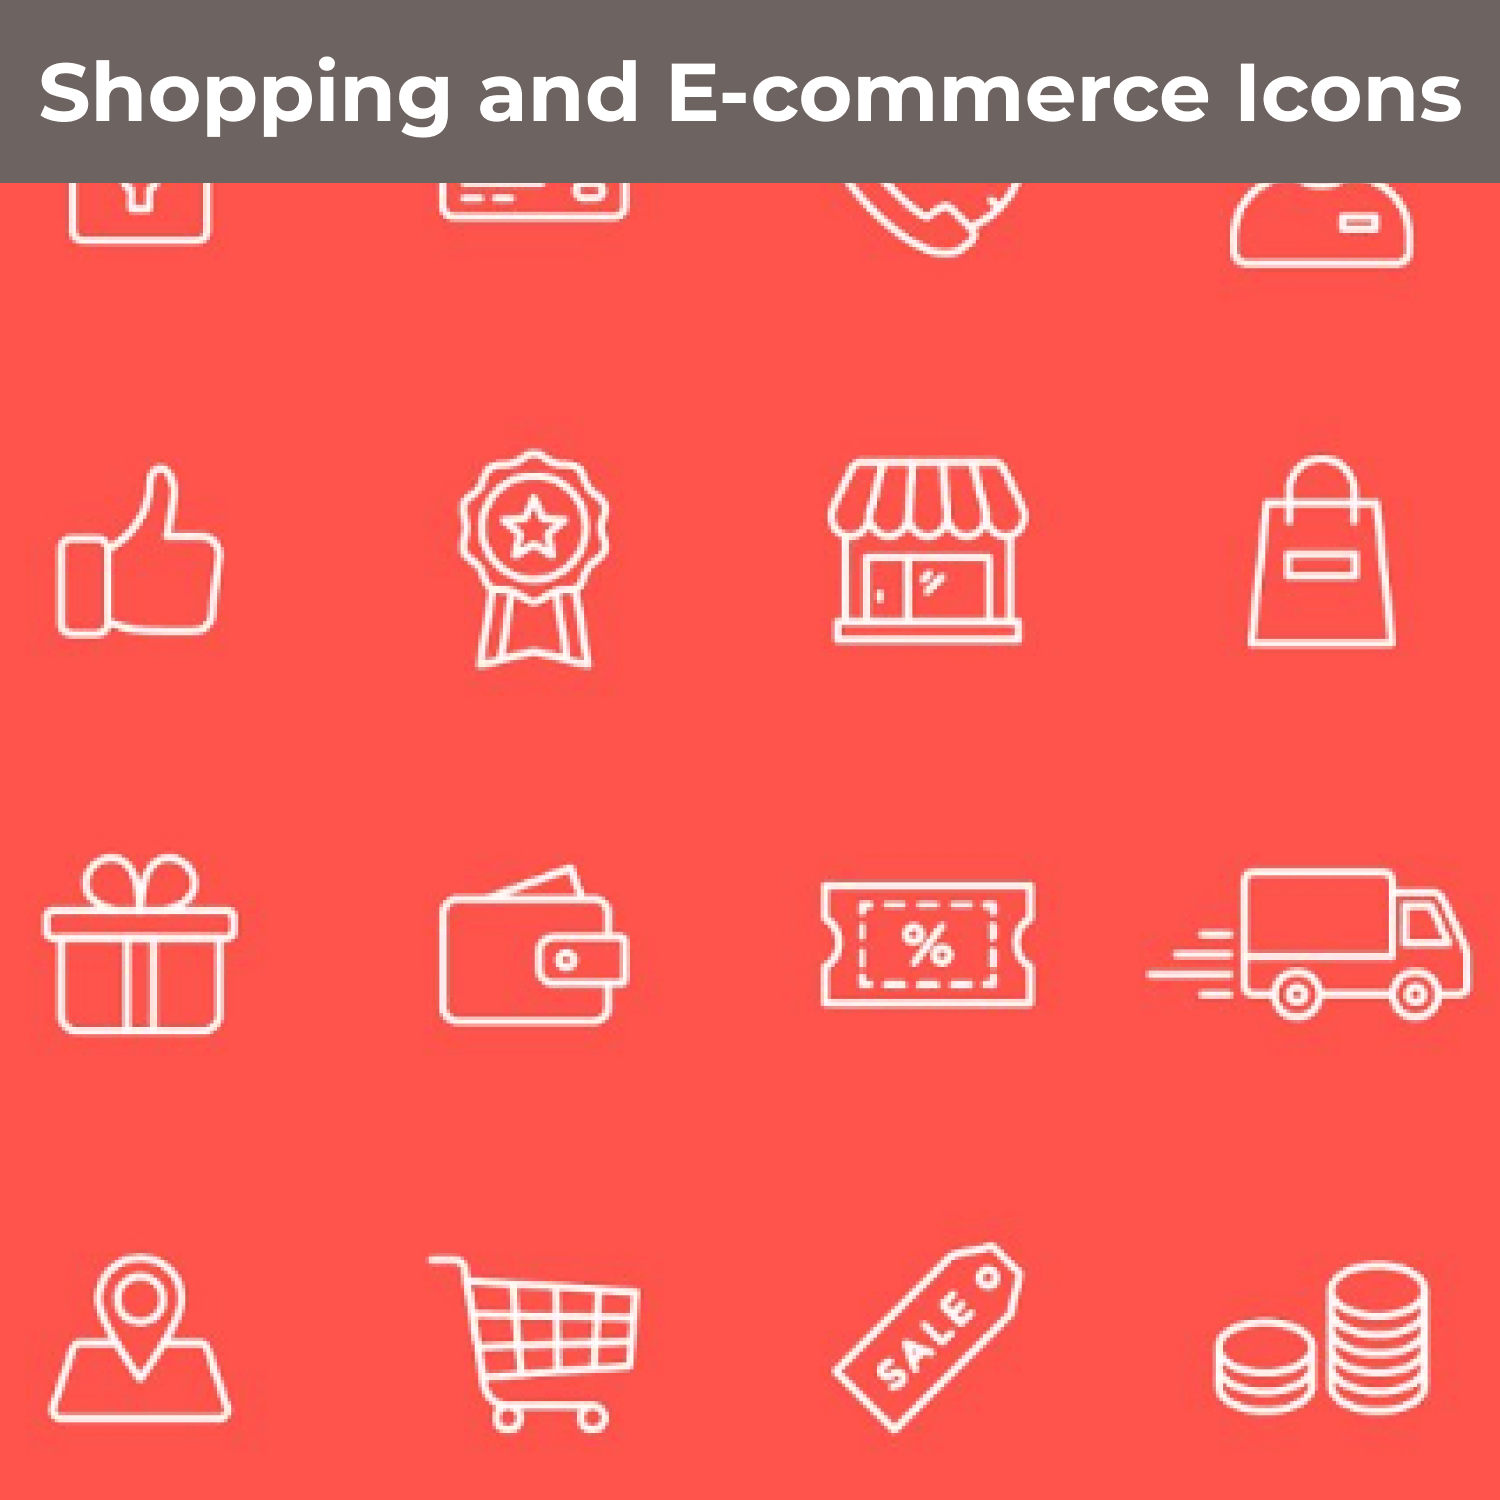 Shopping and E-commerce Icons.